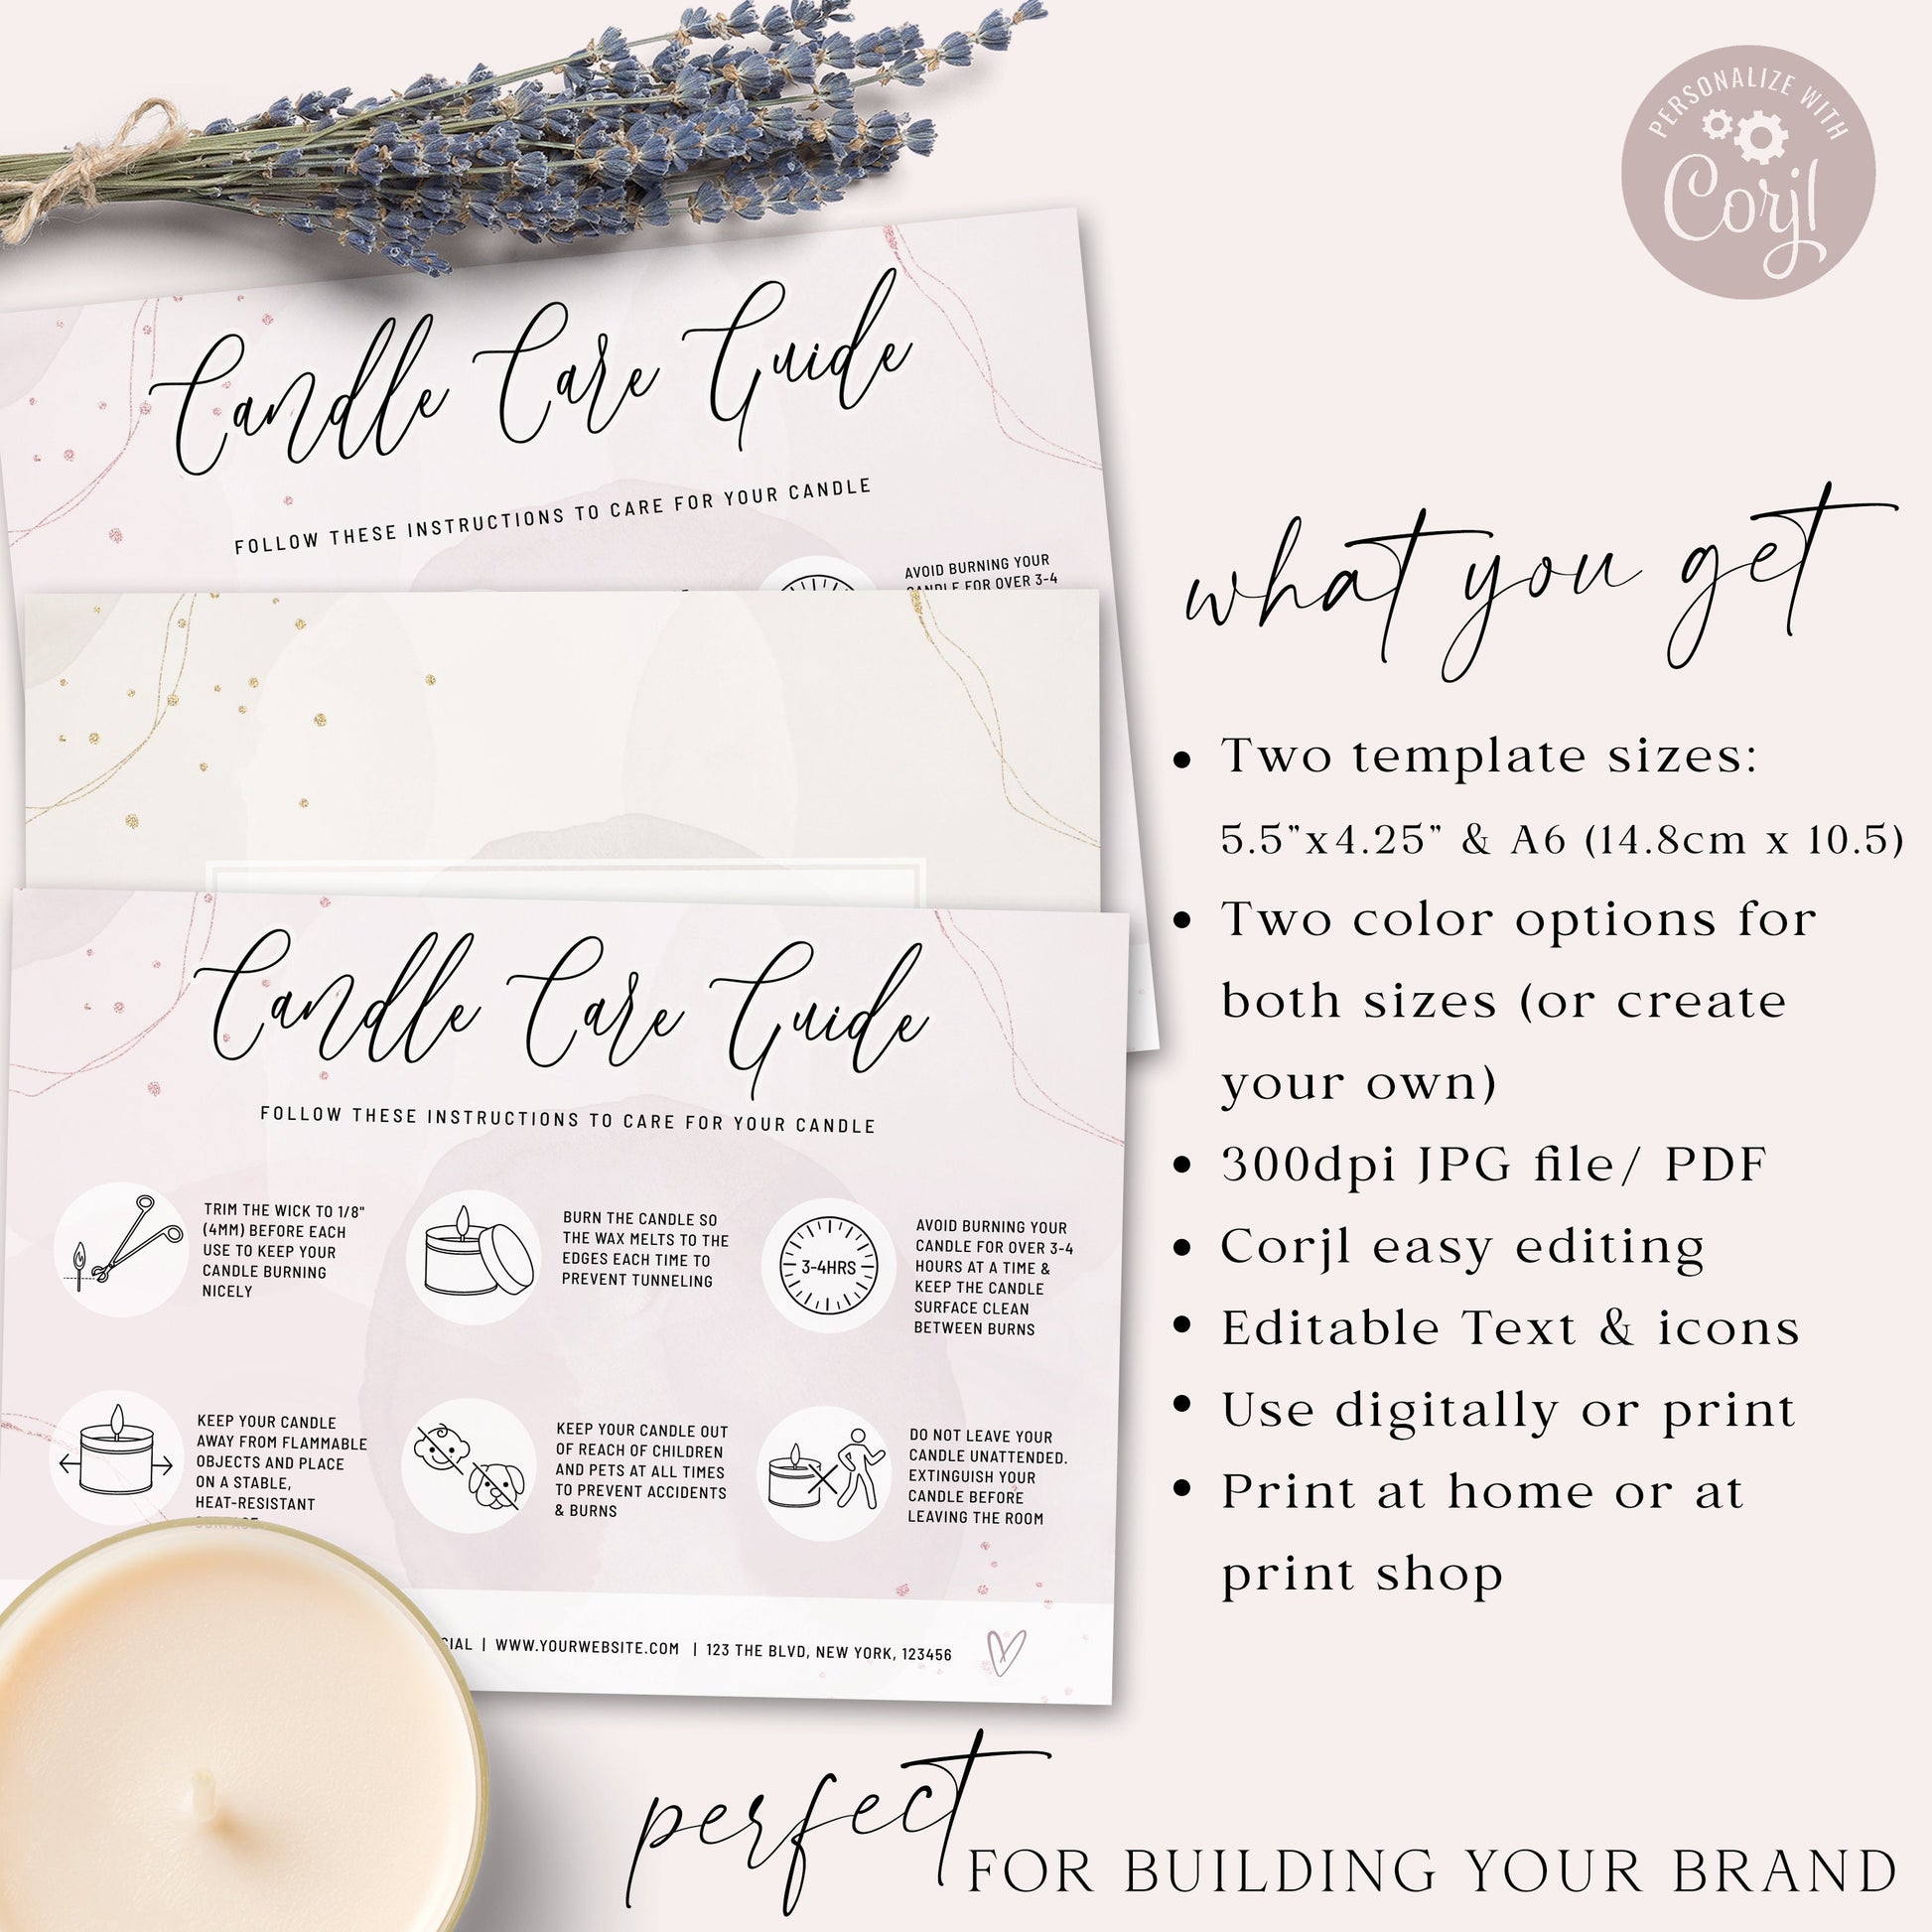 Candle Care Card Editable Template, Pretty Abstract Candle Instructions Guide, Printable Candle Care Insert, Candle Safety Card AB-002